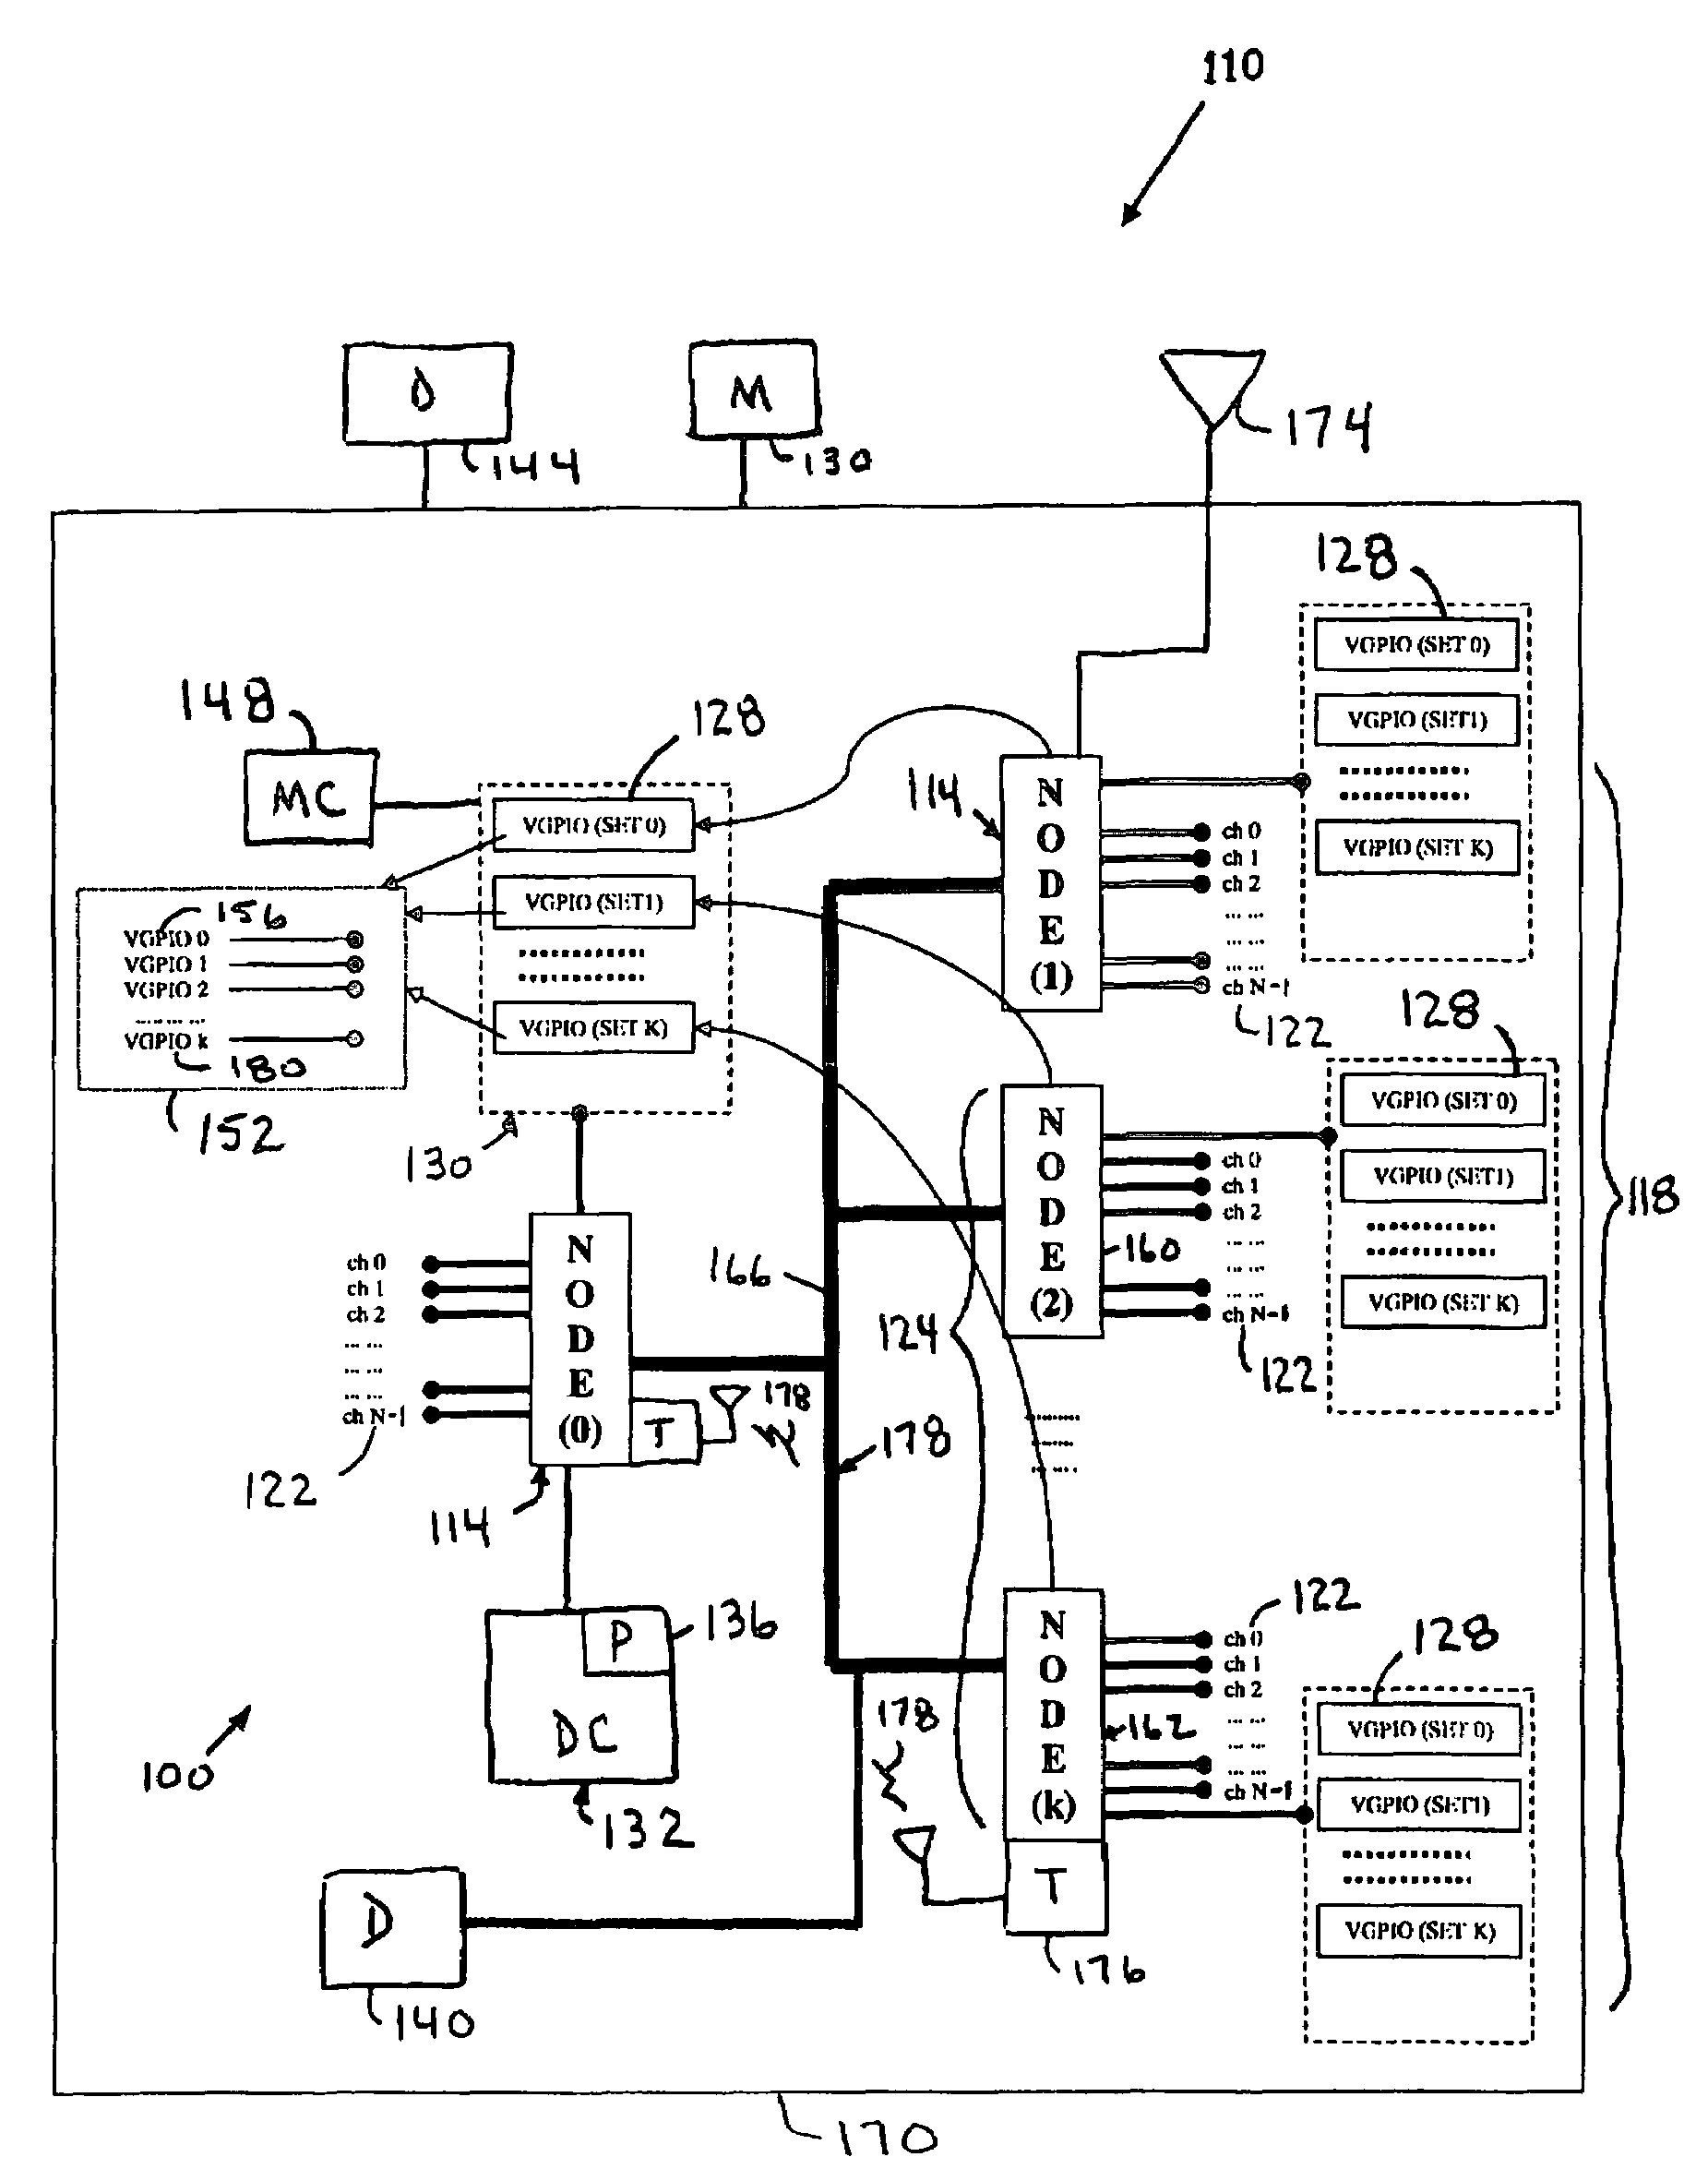 Communication access apparatus, systems, and methods